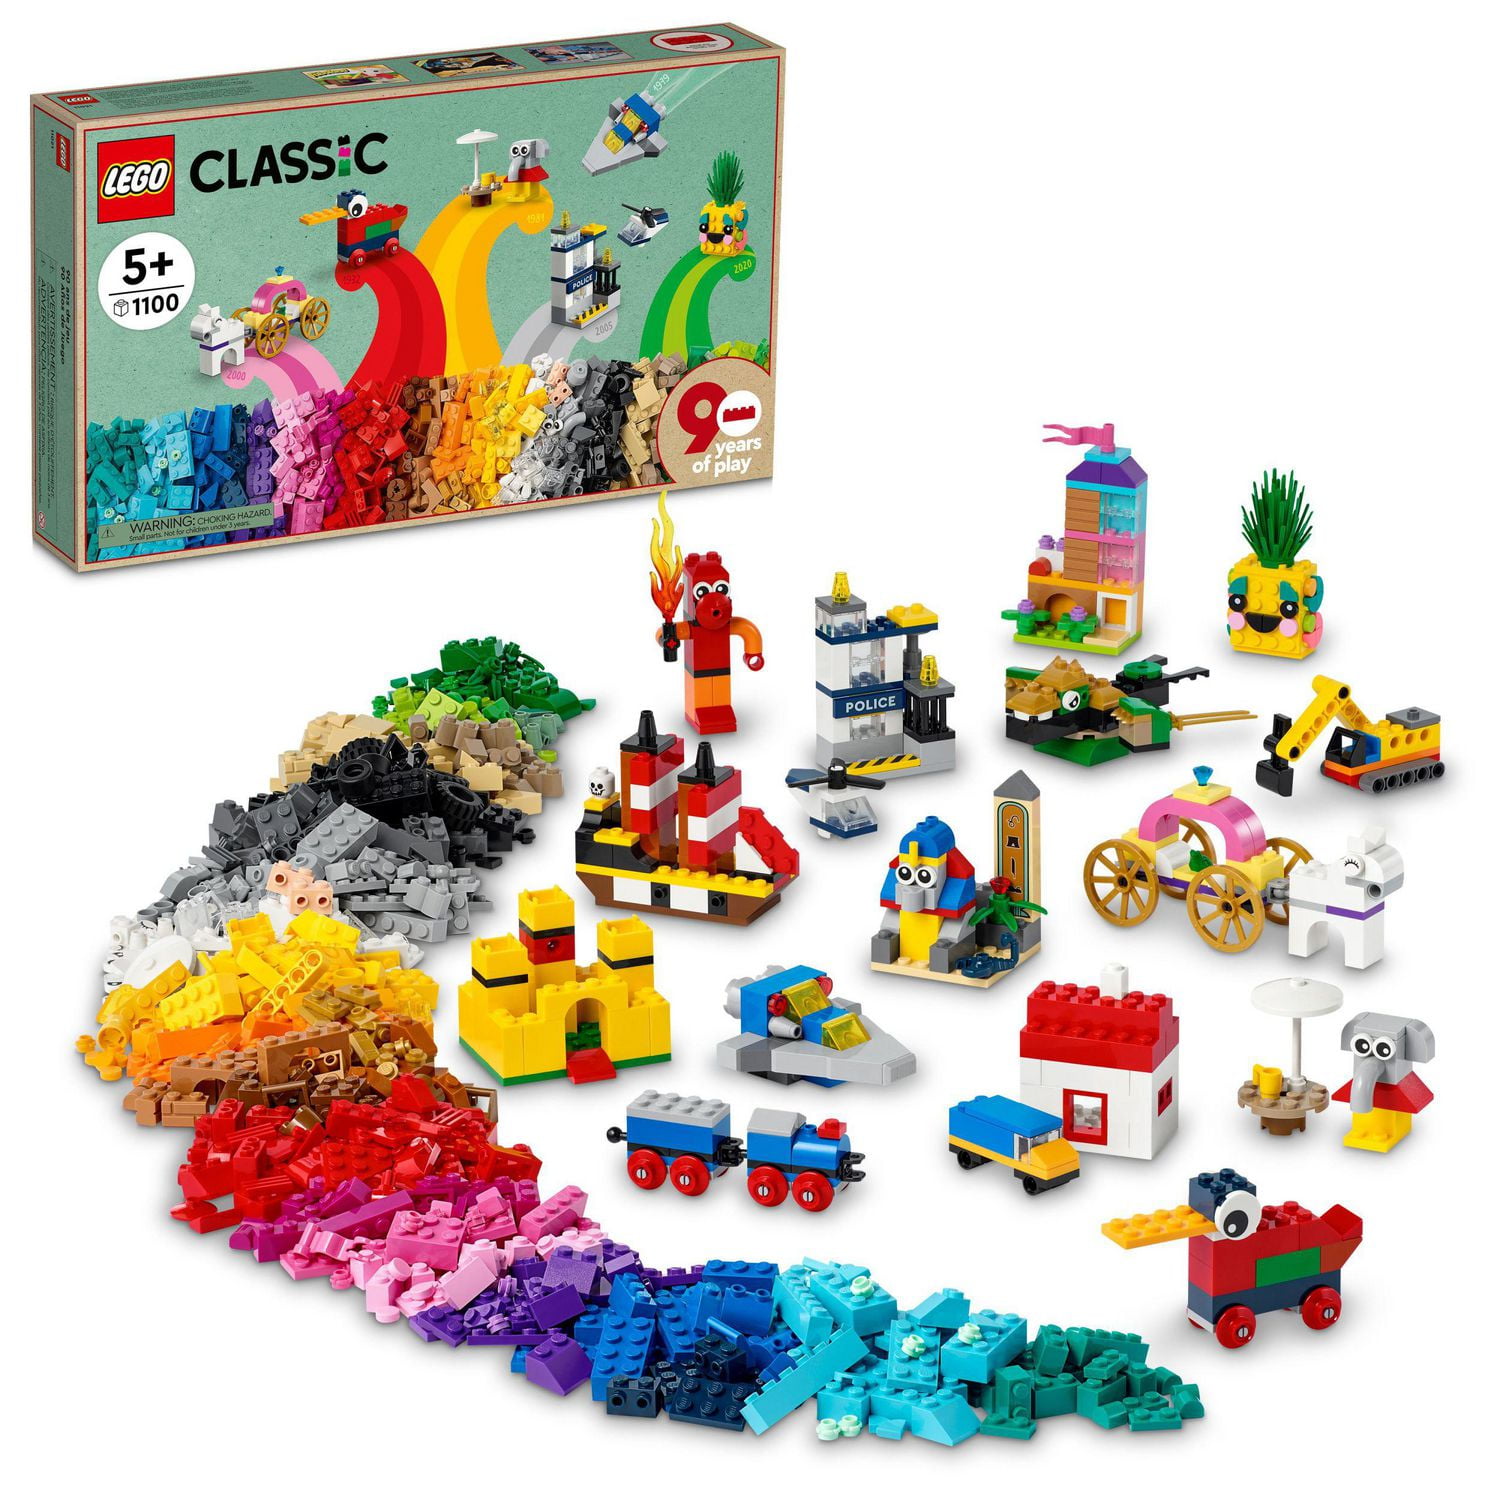 LEGO Classic 90 Years of Play 11021 Toy Building Kit (1100 Pieces